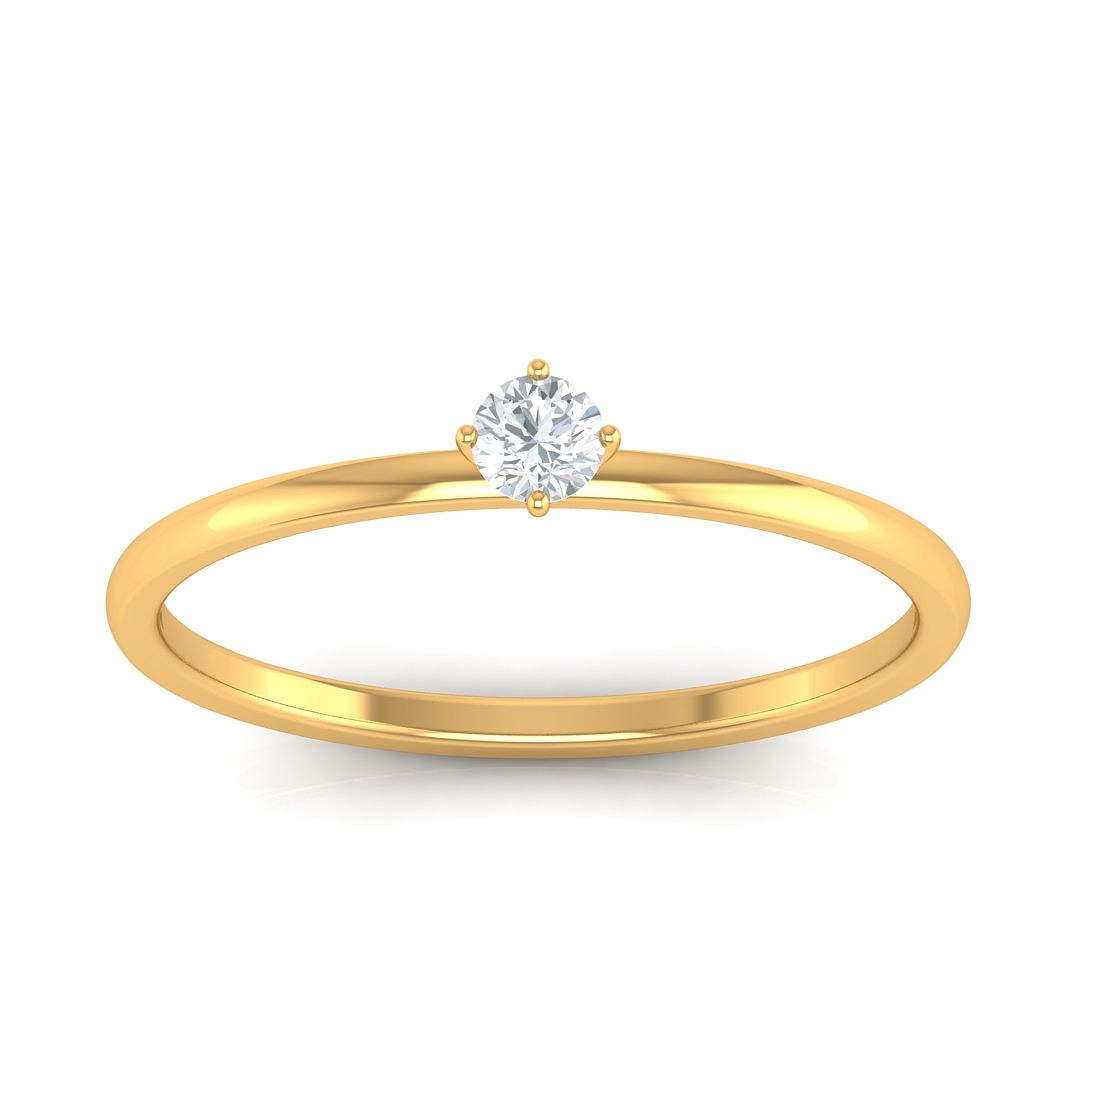 Trendy Diamond Ring Designs for the Modern Woman || Single stone Solitairering for women ||